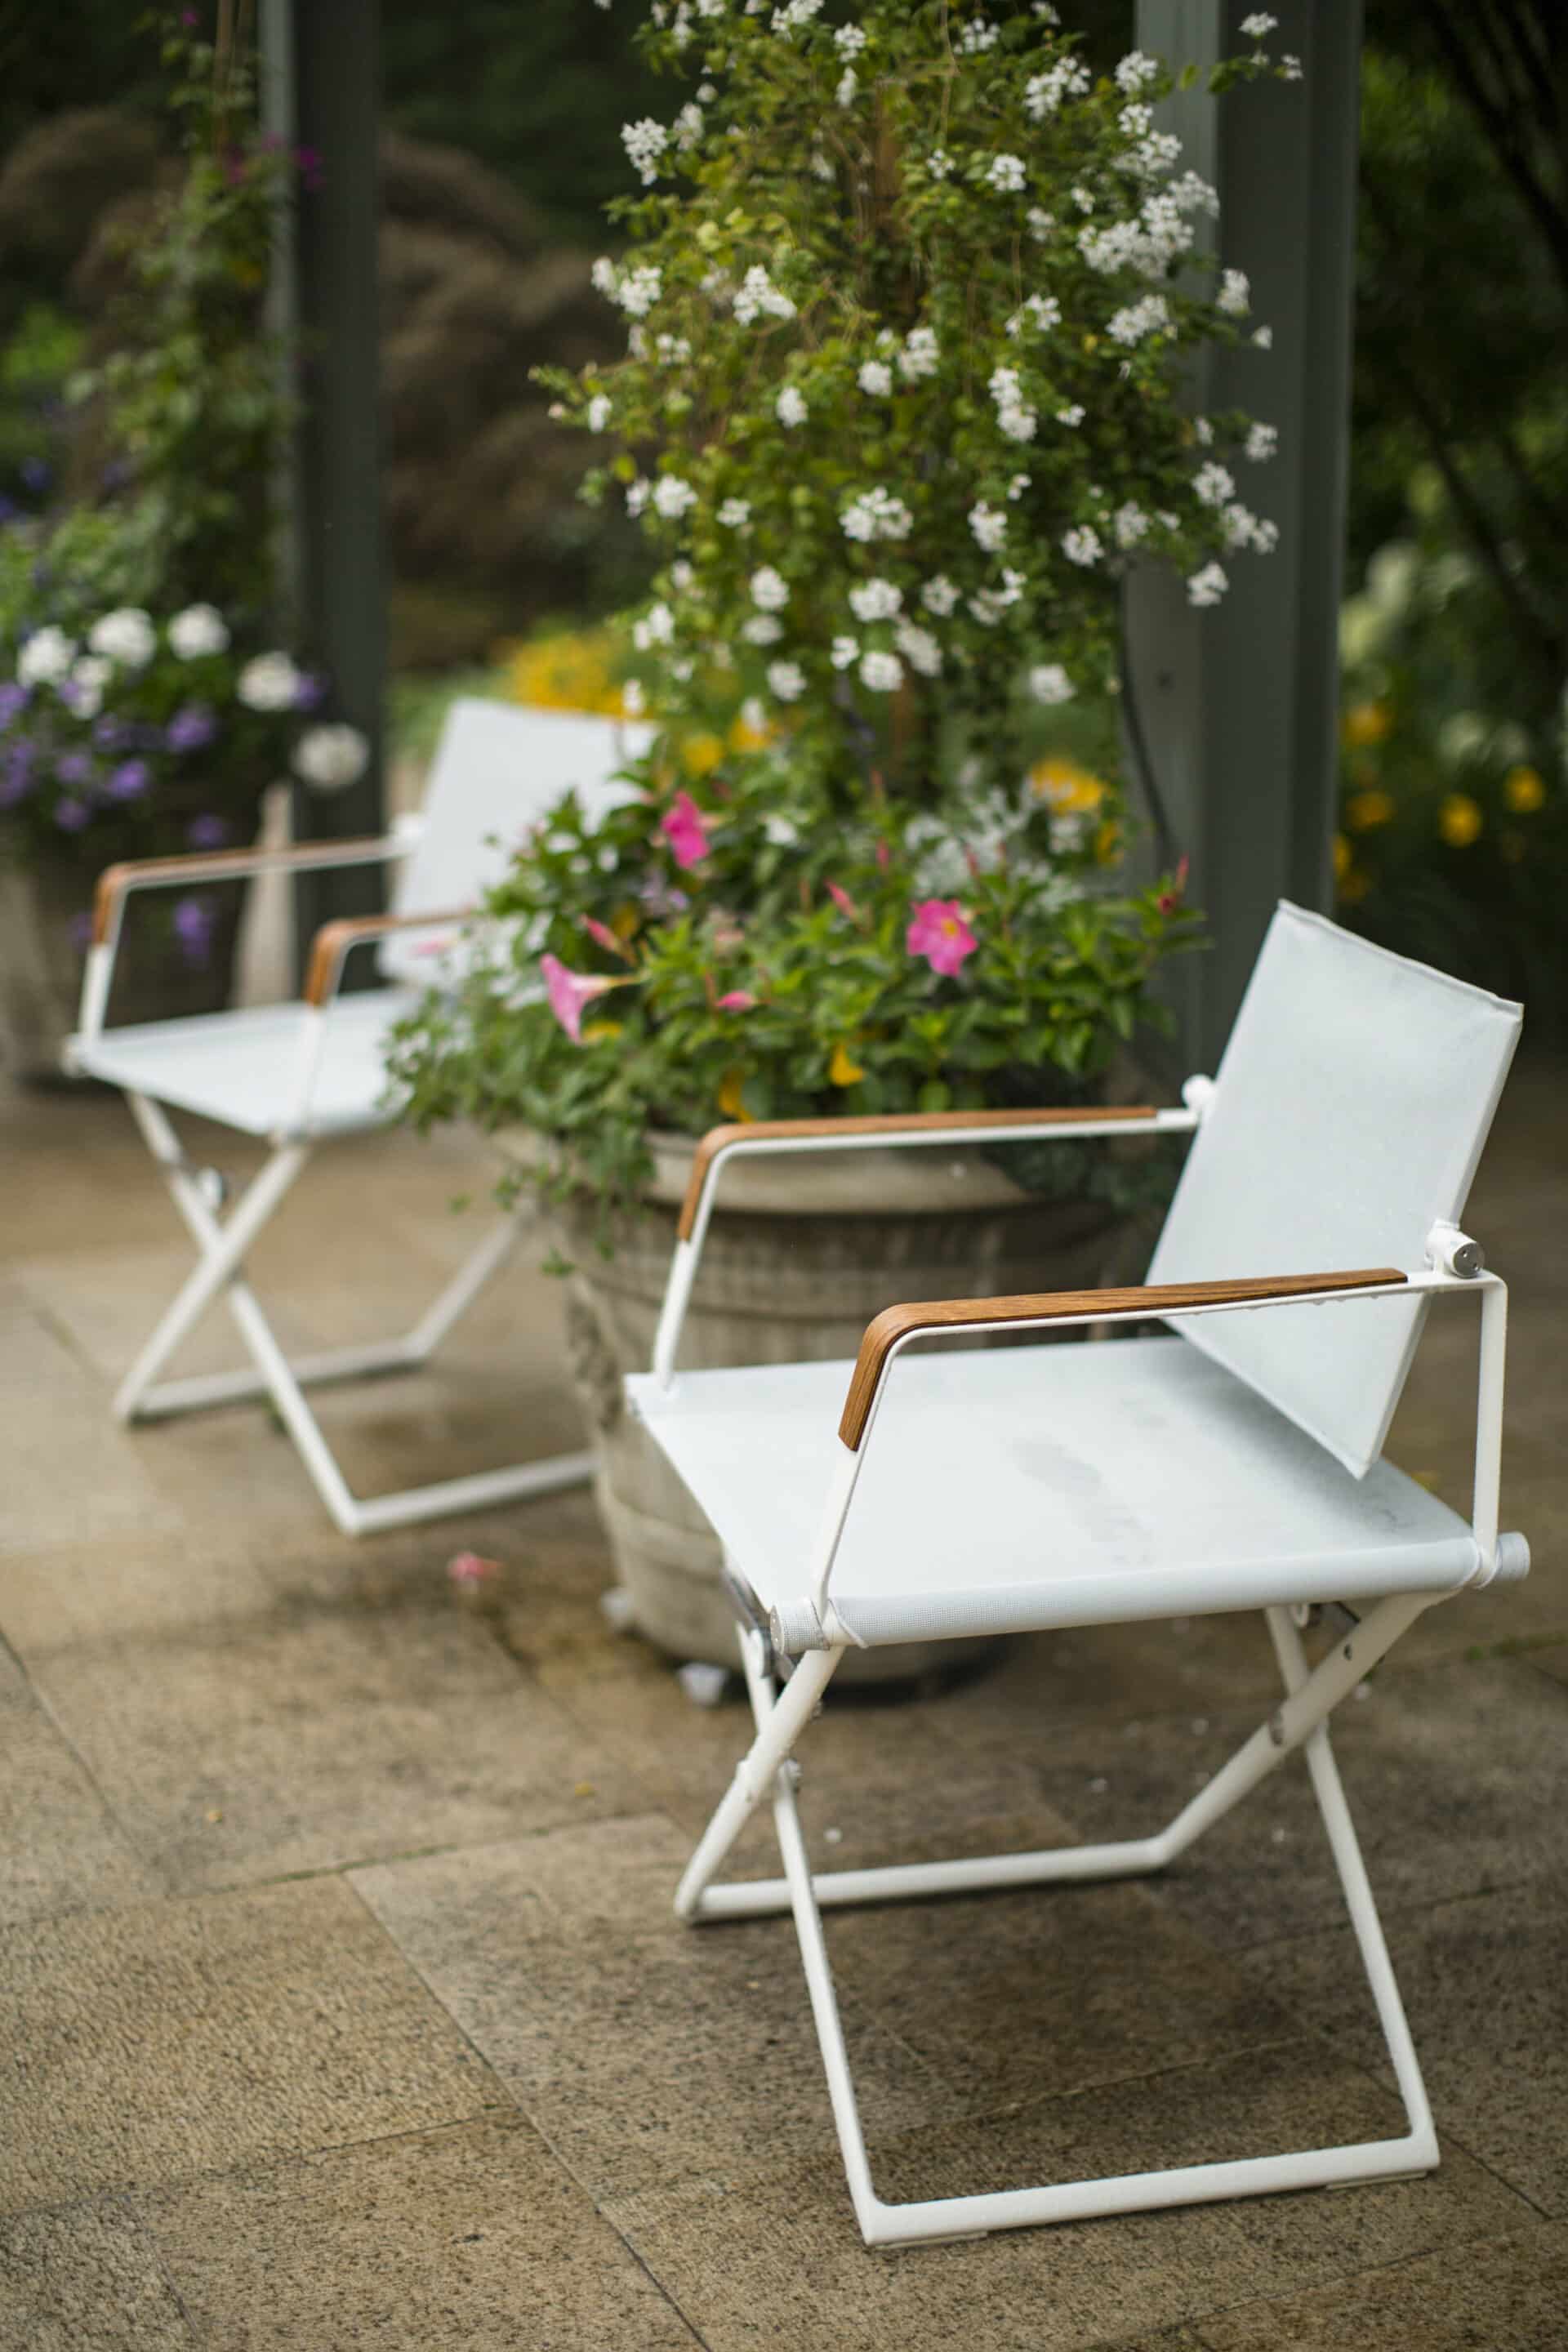 White garden chairs and blooming flowers in patio.